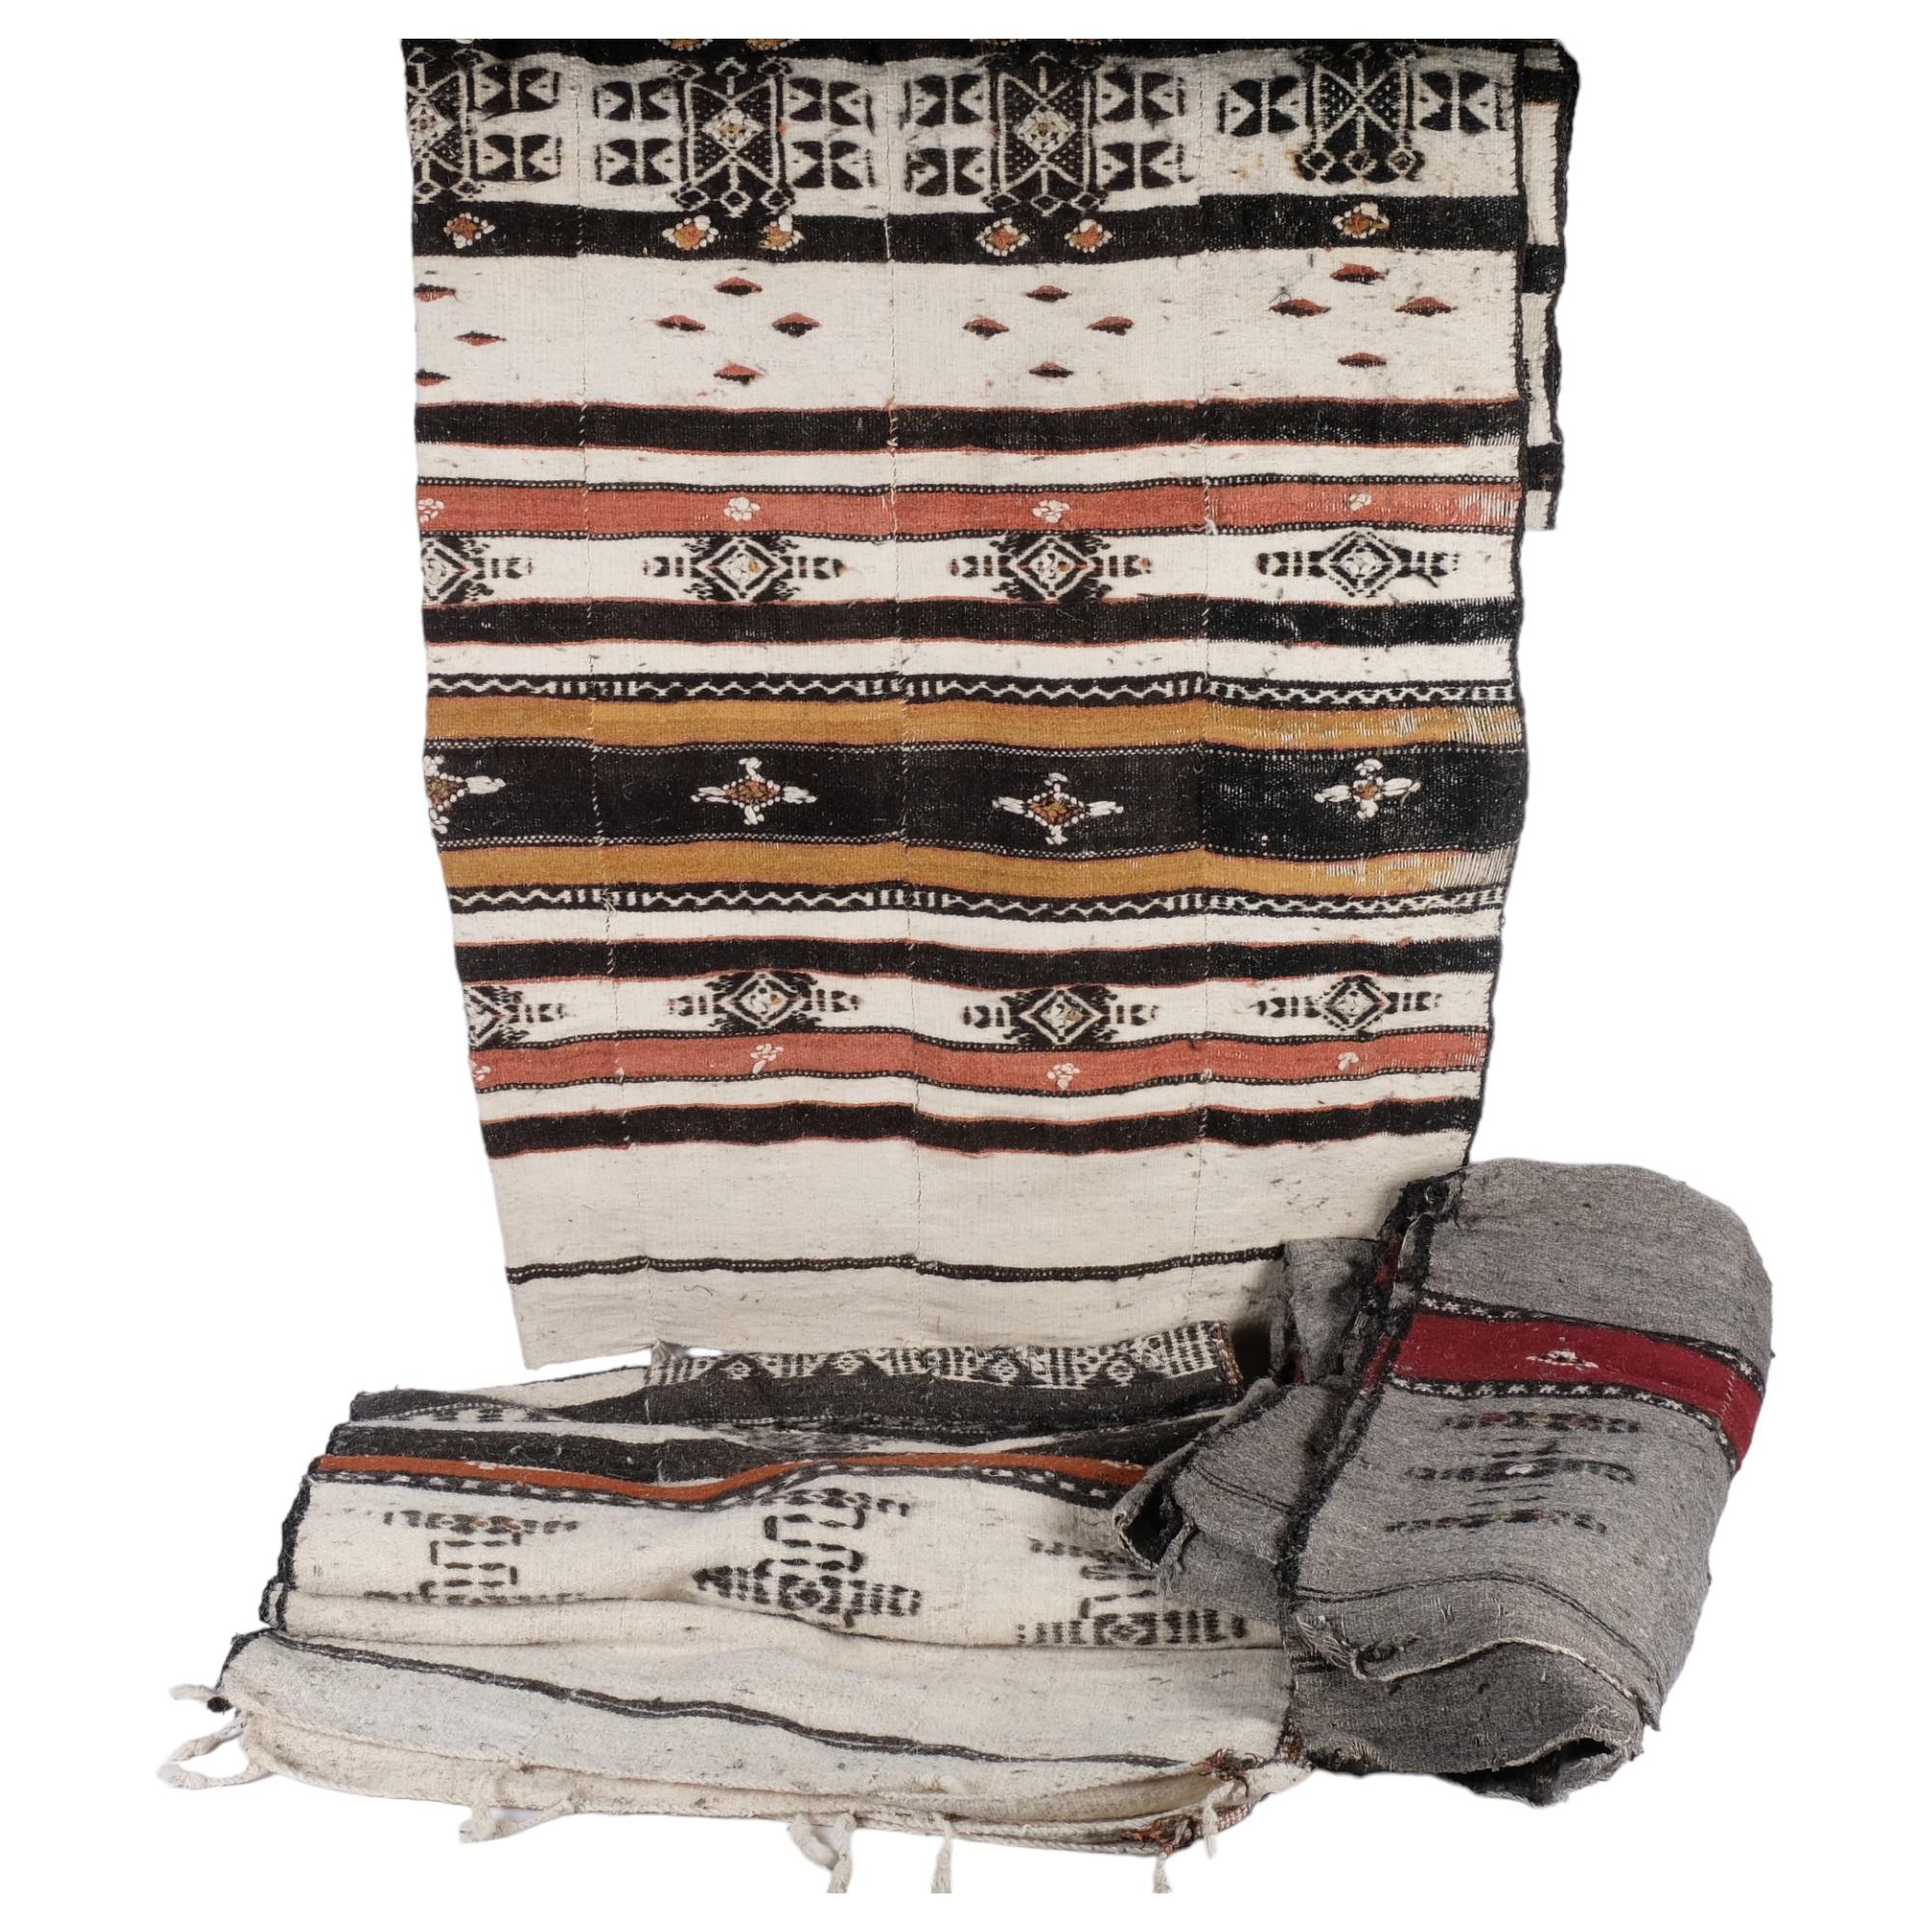 An Ethnic woollen style blanket, with symmetrical decoration, approx 270cm x 150cm, and 2 other